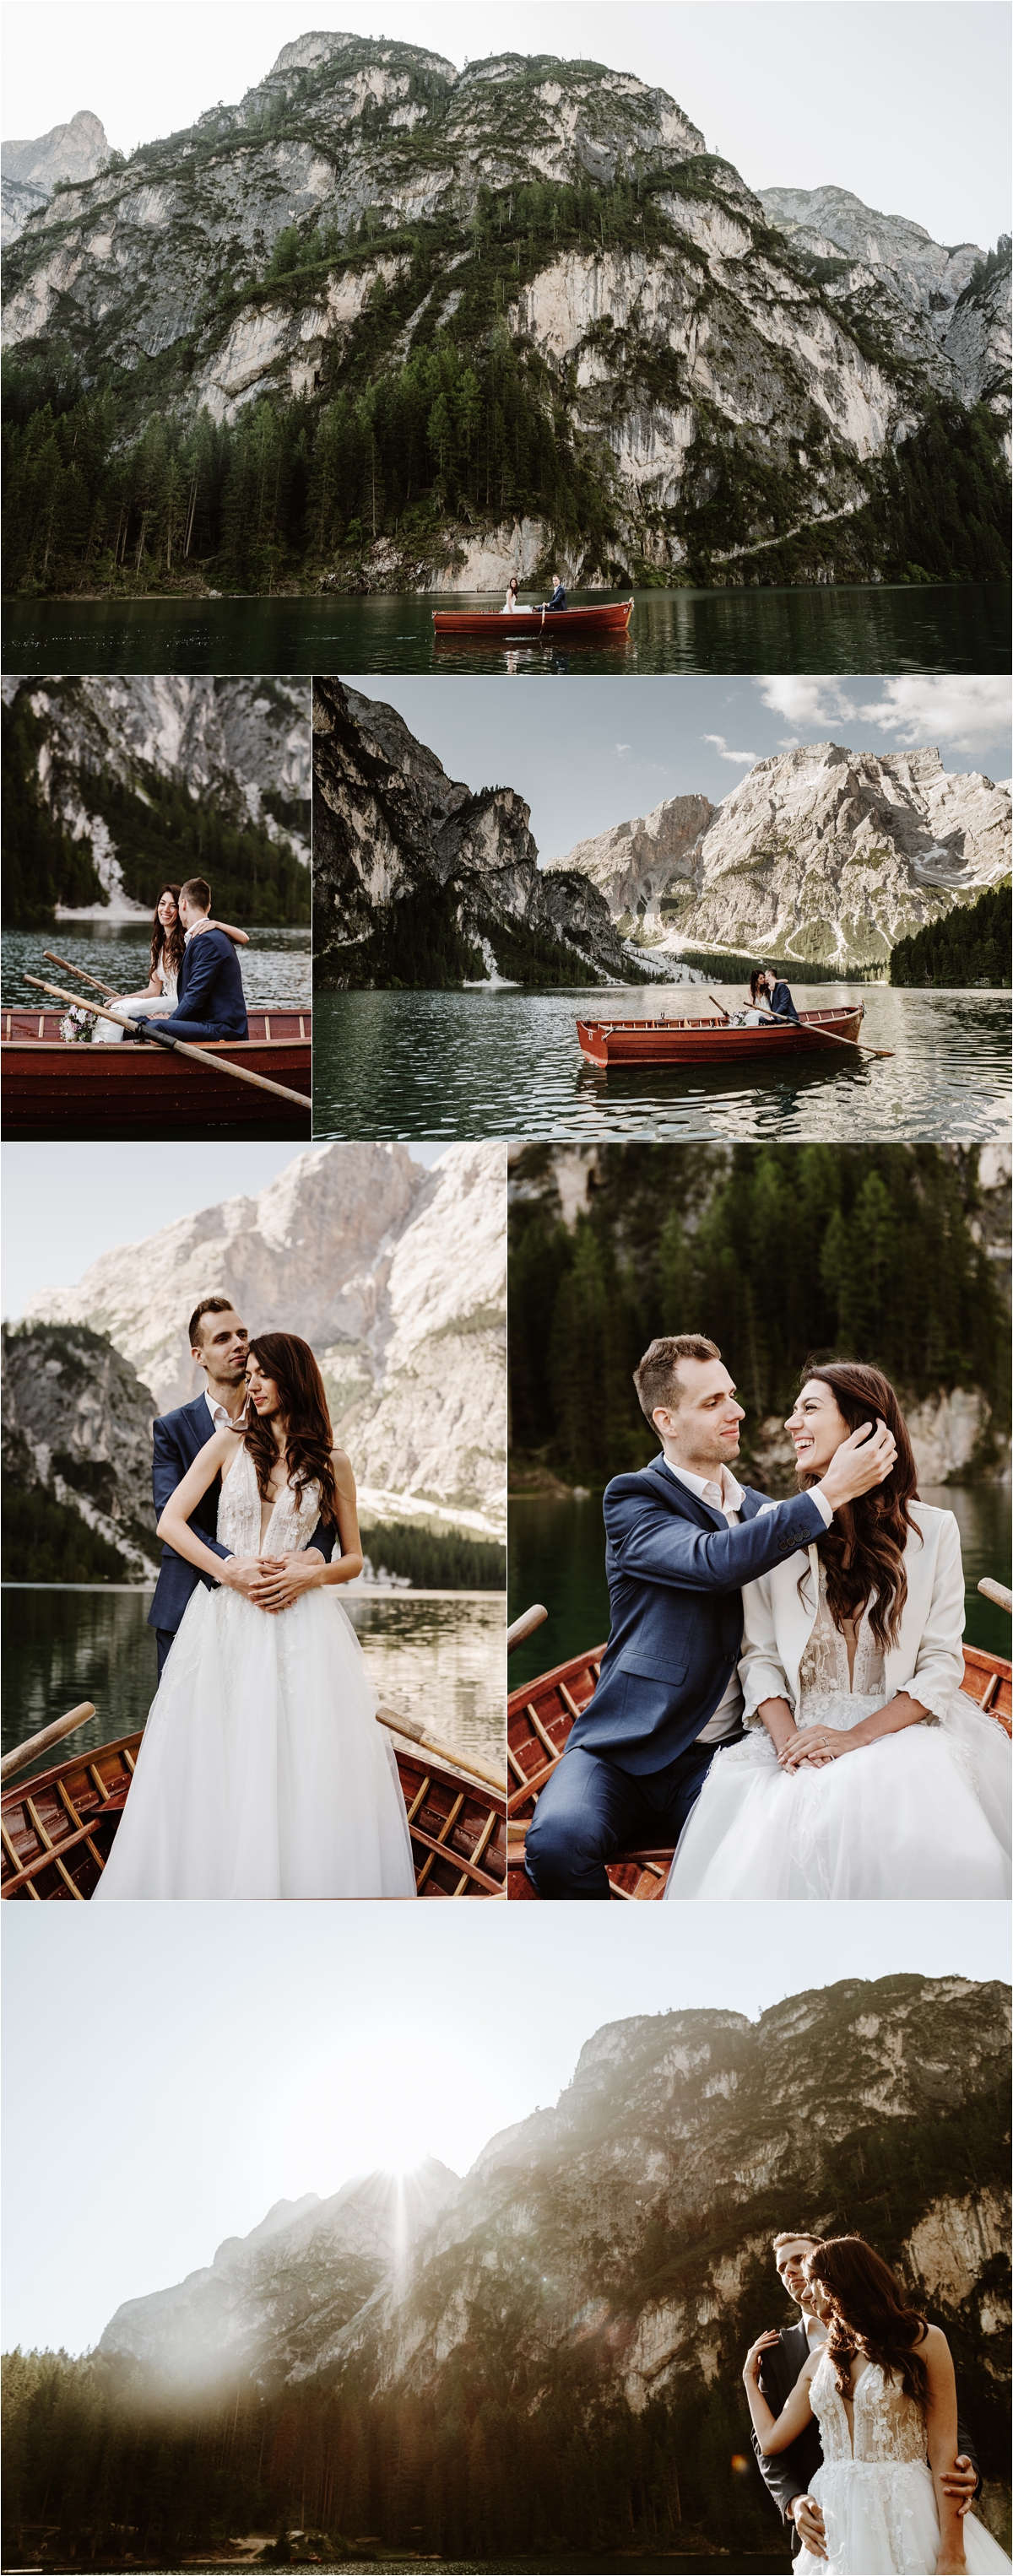 The bride and groom Patya & Tihomir go boating on Lake Braies. Photography by Wild Connections Photography